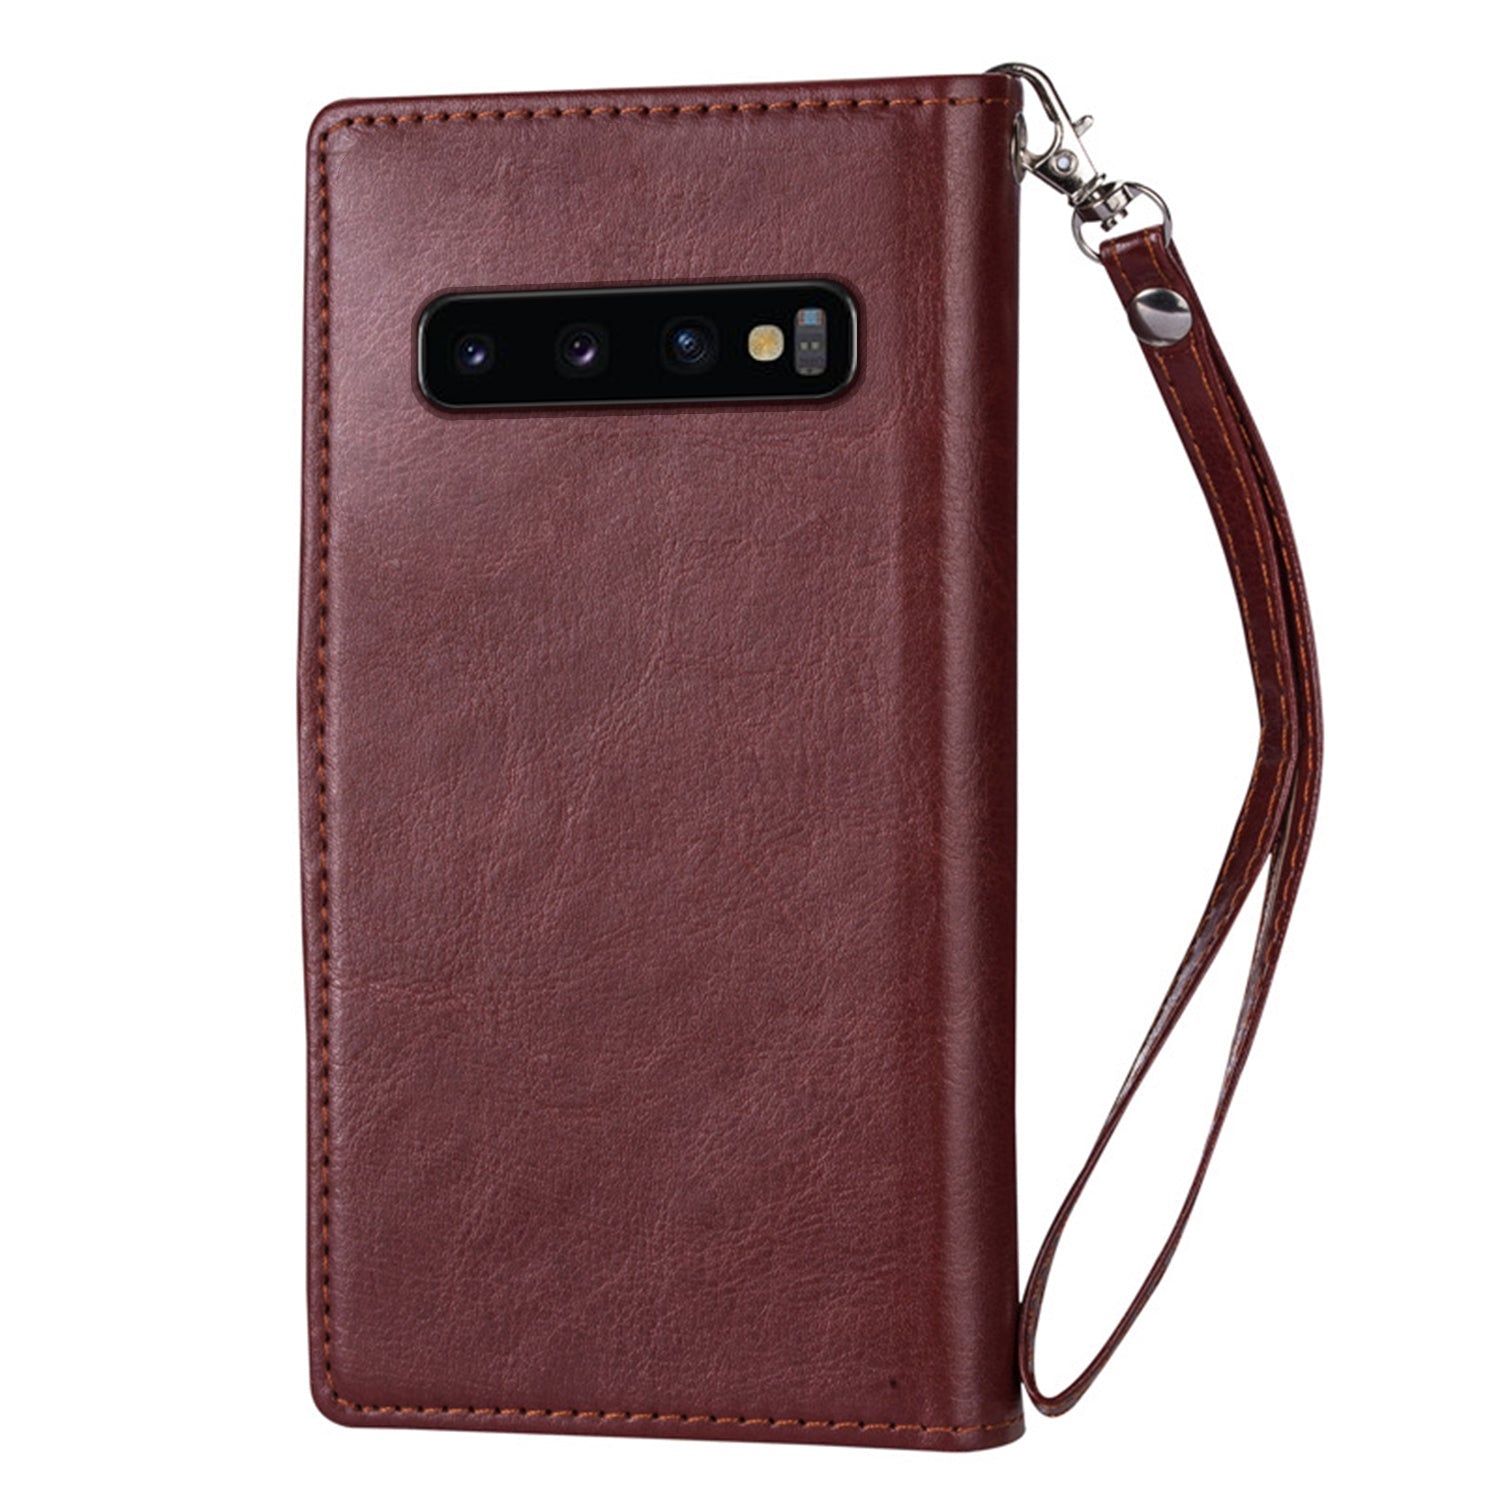 Galaxy S10 Plus 2 in 1 Leather Wallet Case with 9 Credit Card Slots and Removable Back Cover